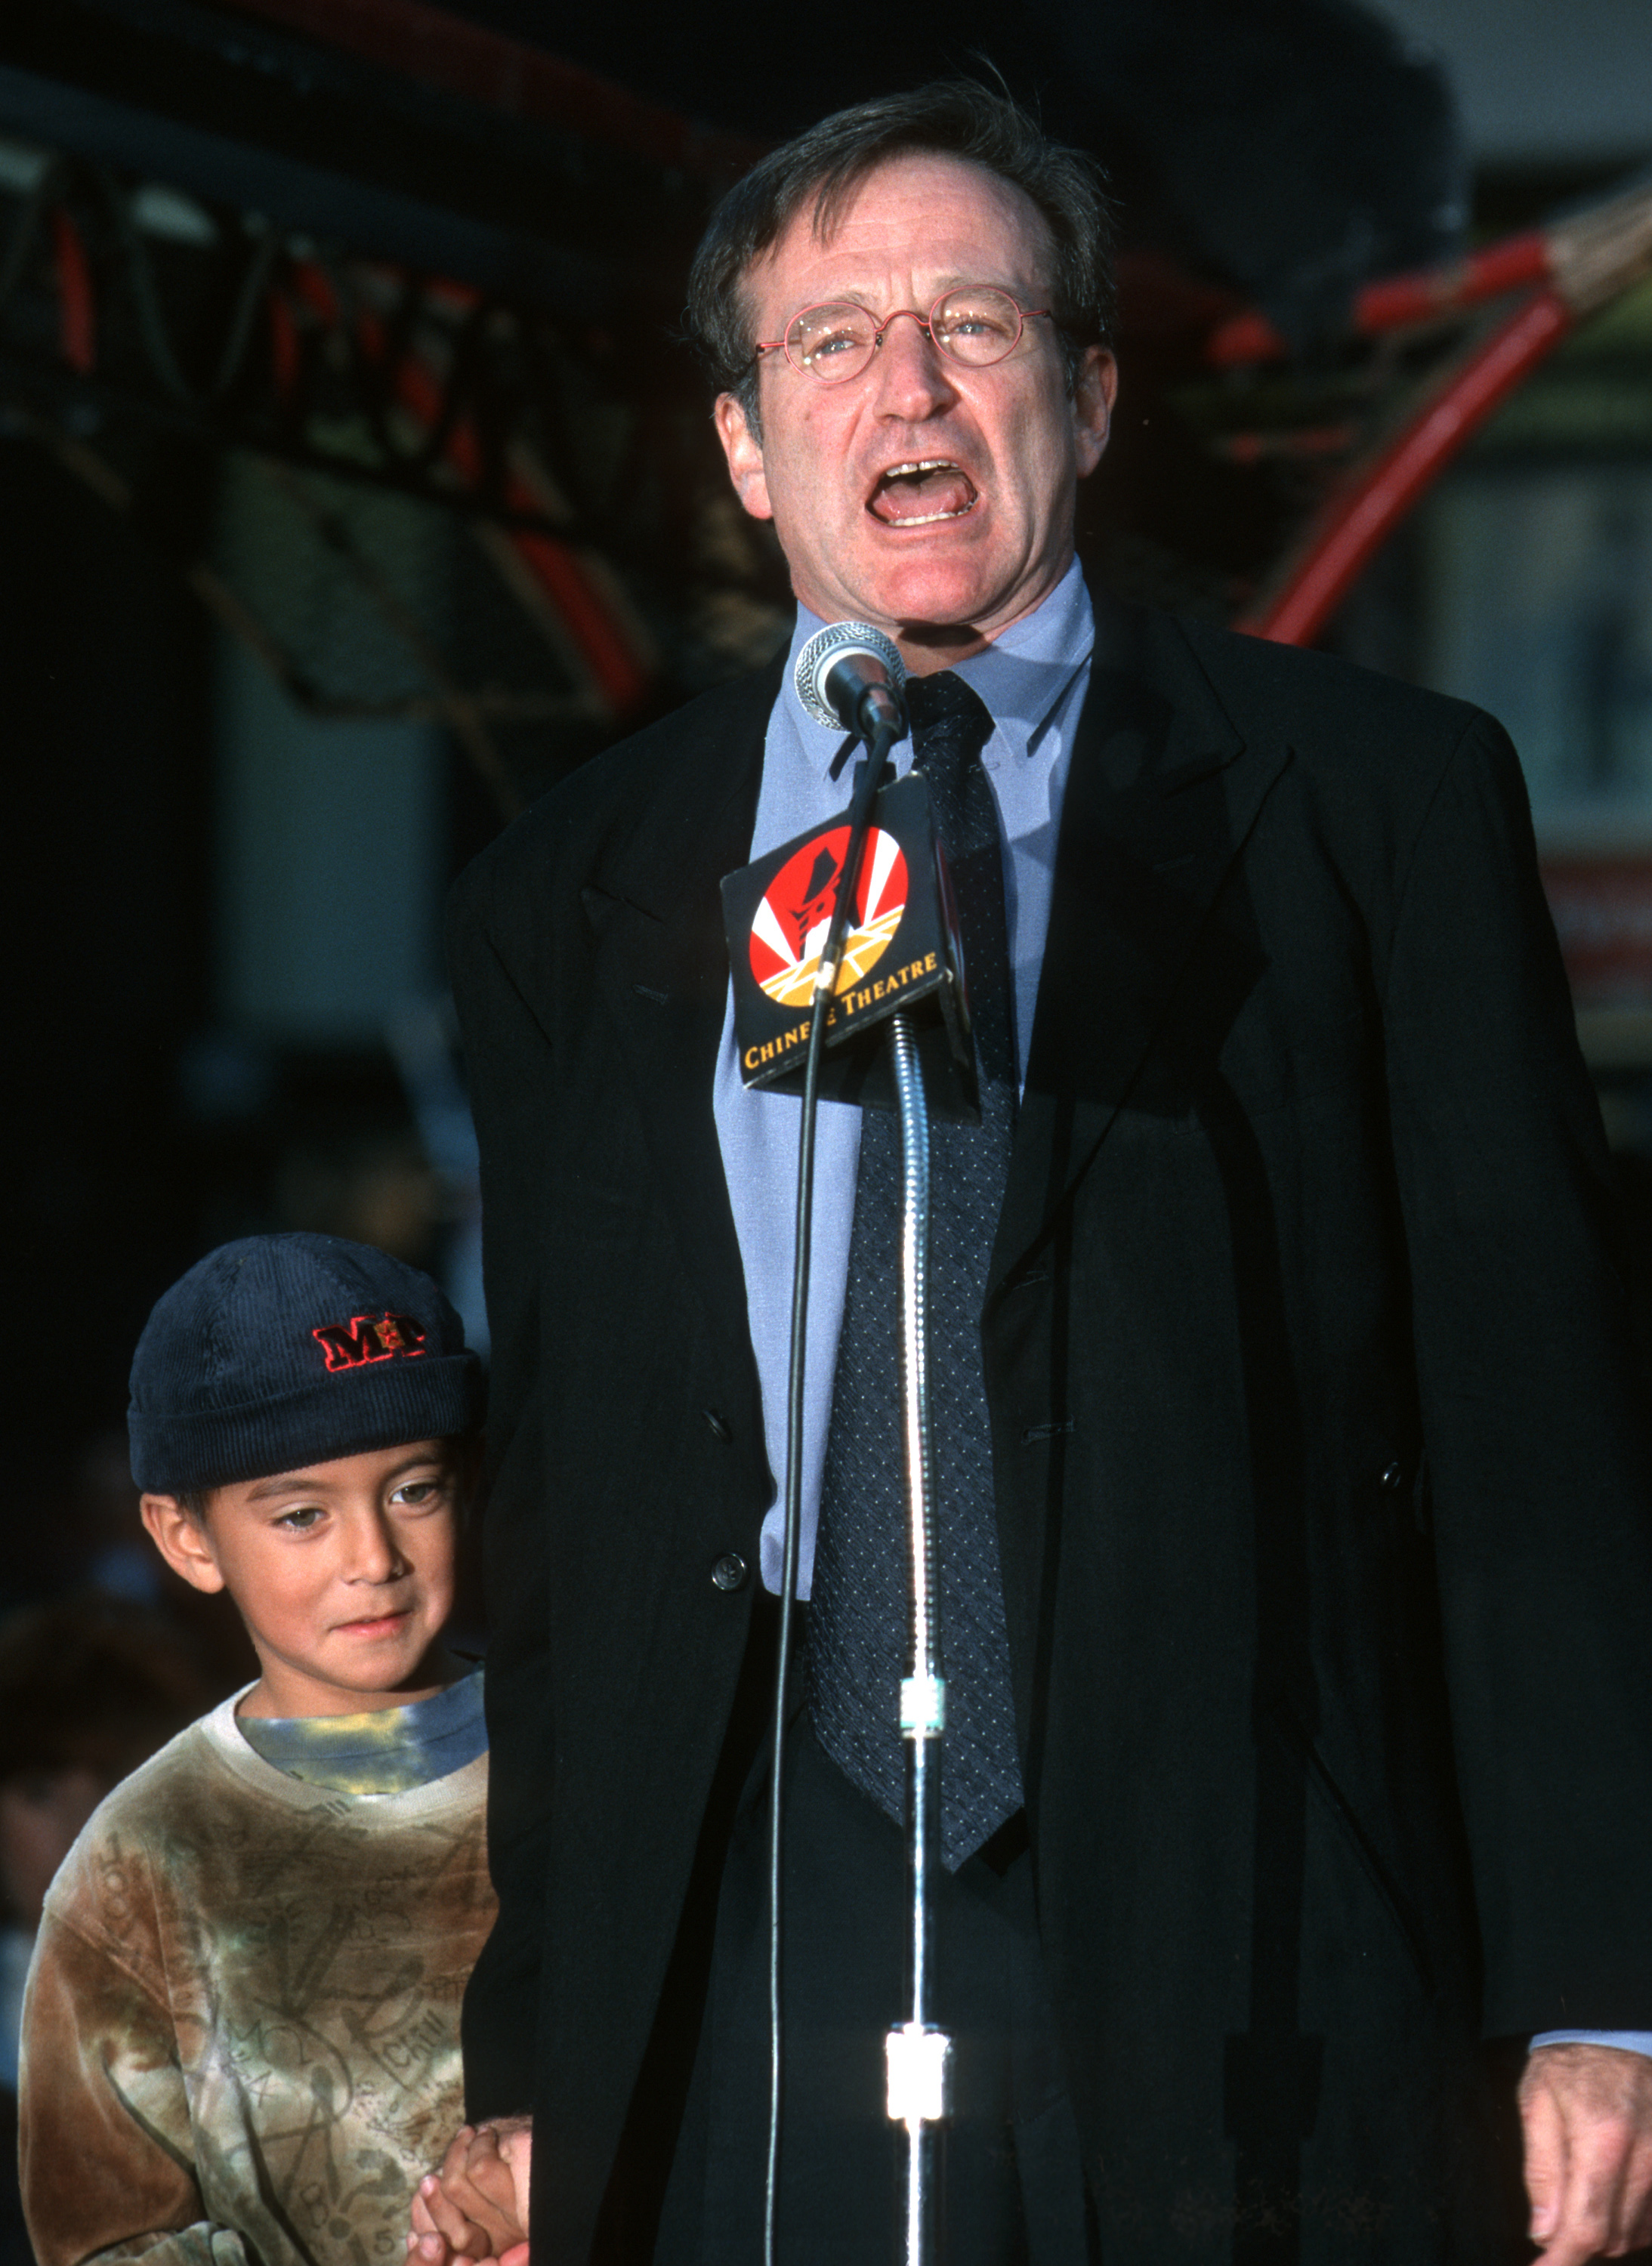 Cody Williams and Robin Williams during Robin Williams Footprint Ceremony in Hollywood, California on December 22, 1998 | Source: Getty Images